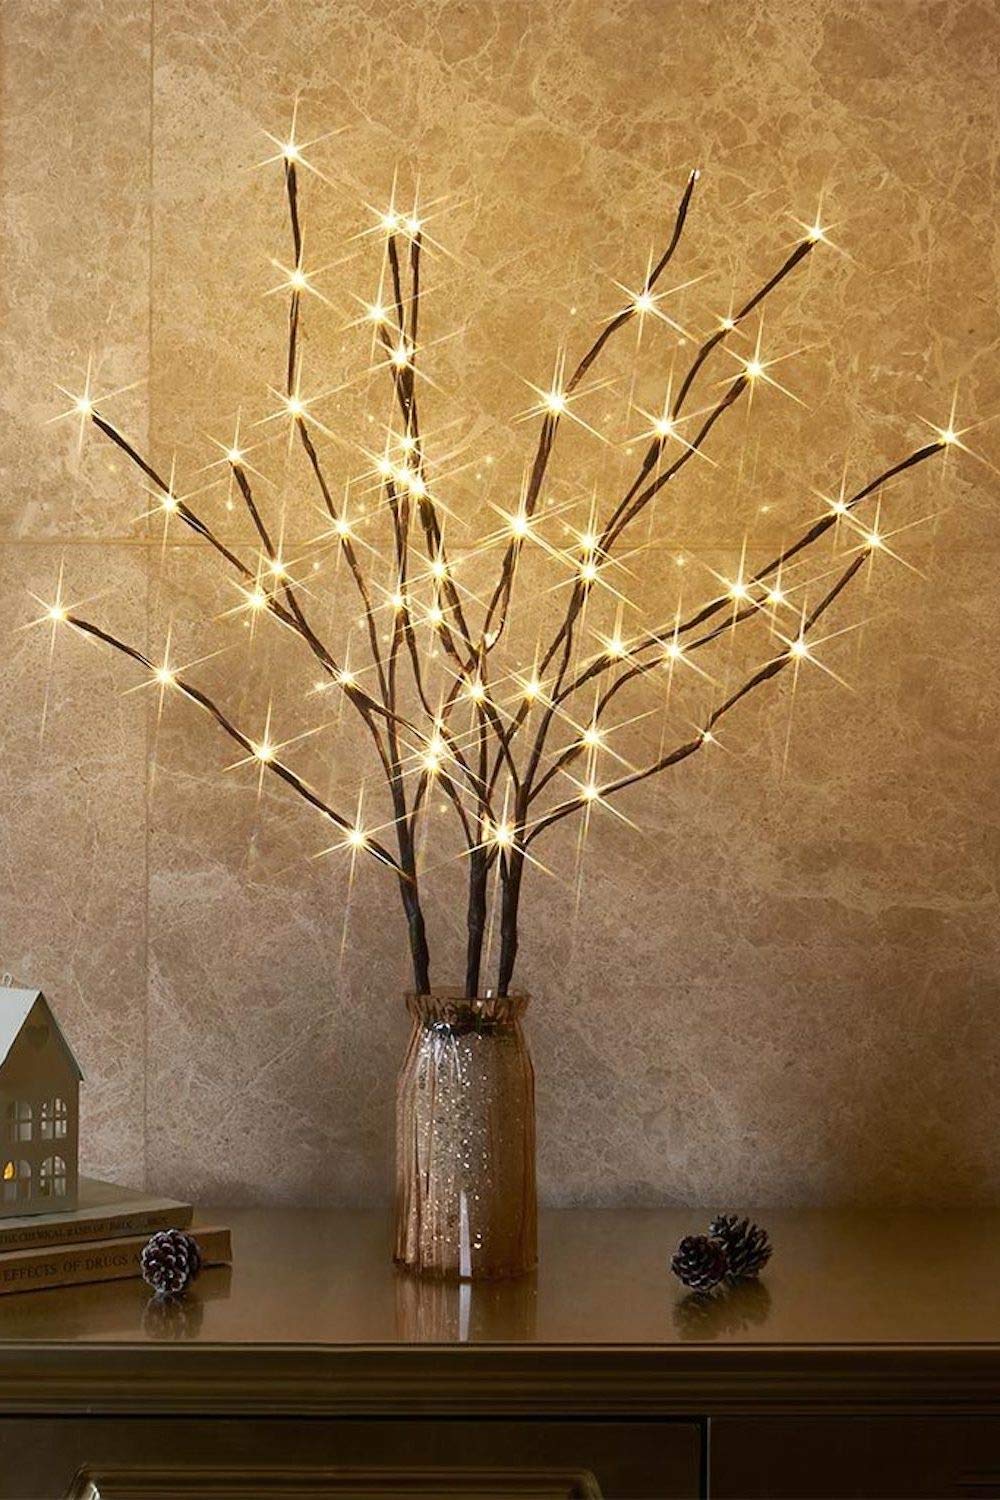 EAMBRITE 3PK 76cm Home Decorative Twig Lights Garden Stake Branch Lights with 60 Warm White LEDs Mains Powered Lighted Branches for Spring Decor Outdoor and Indoor